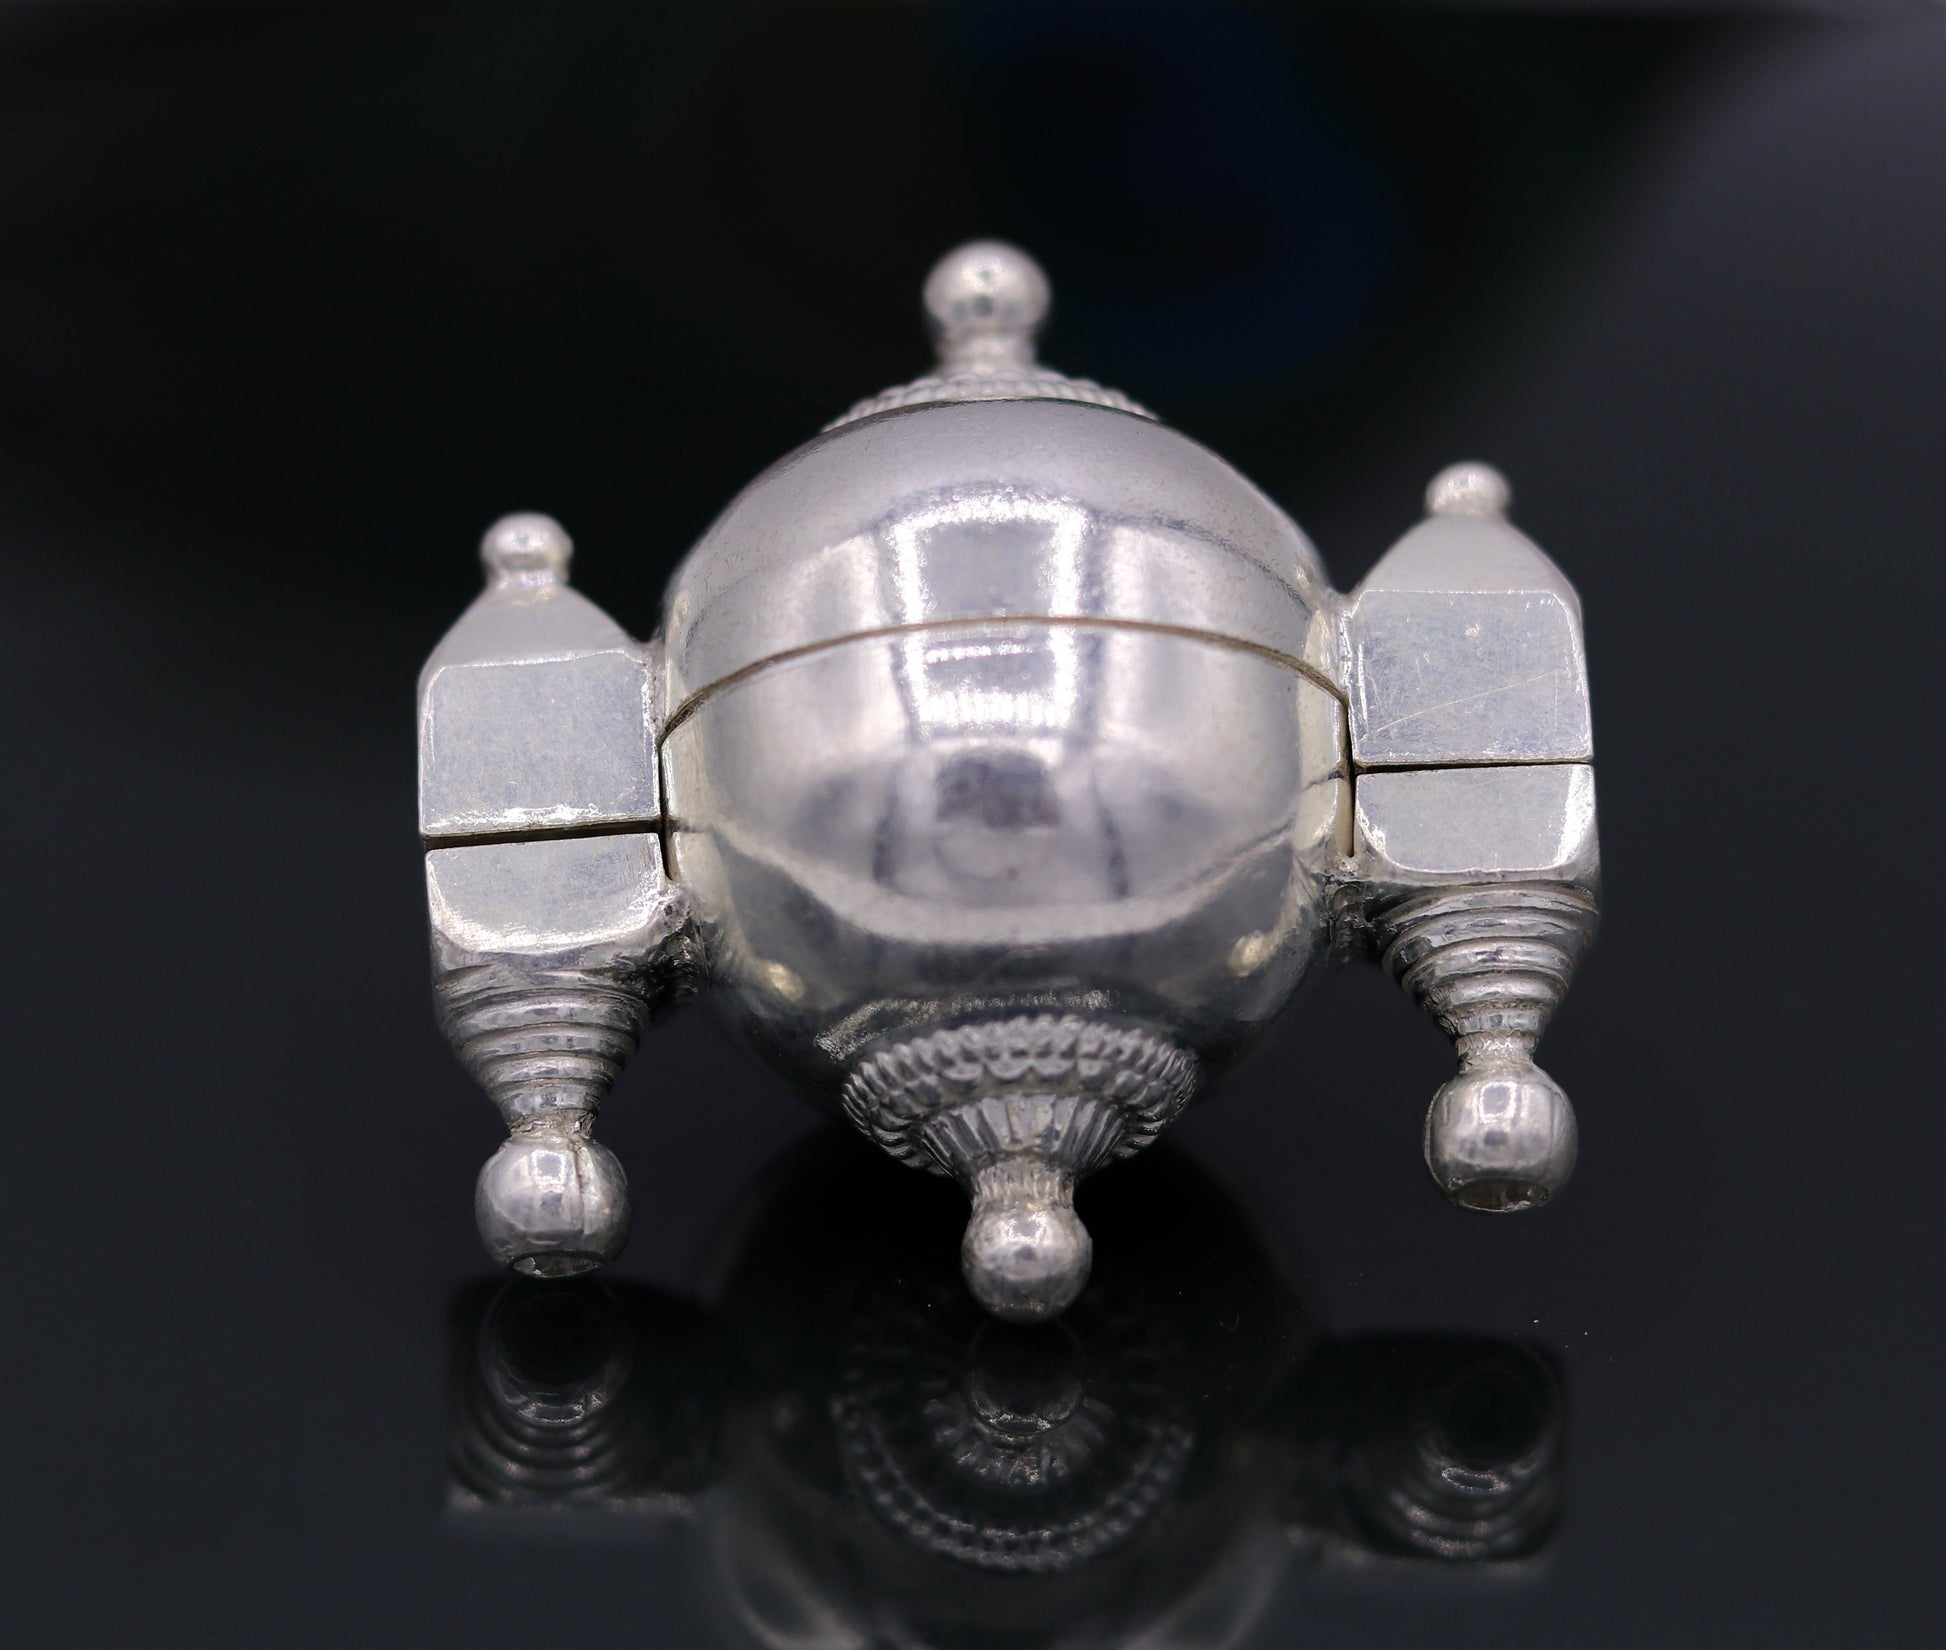 Vintage antique design rare Indian lord shiva lingam box container box sterling silver pendant jewelry from rajasthan india nsp116 - TRIBAL ORNAMENTS